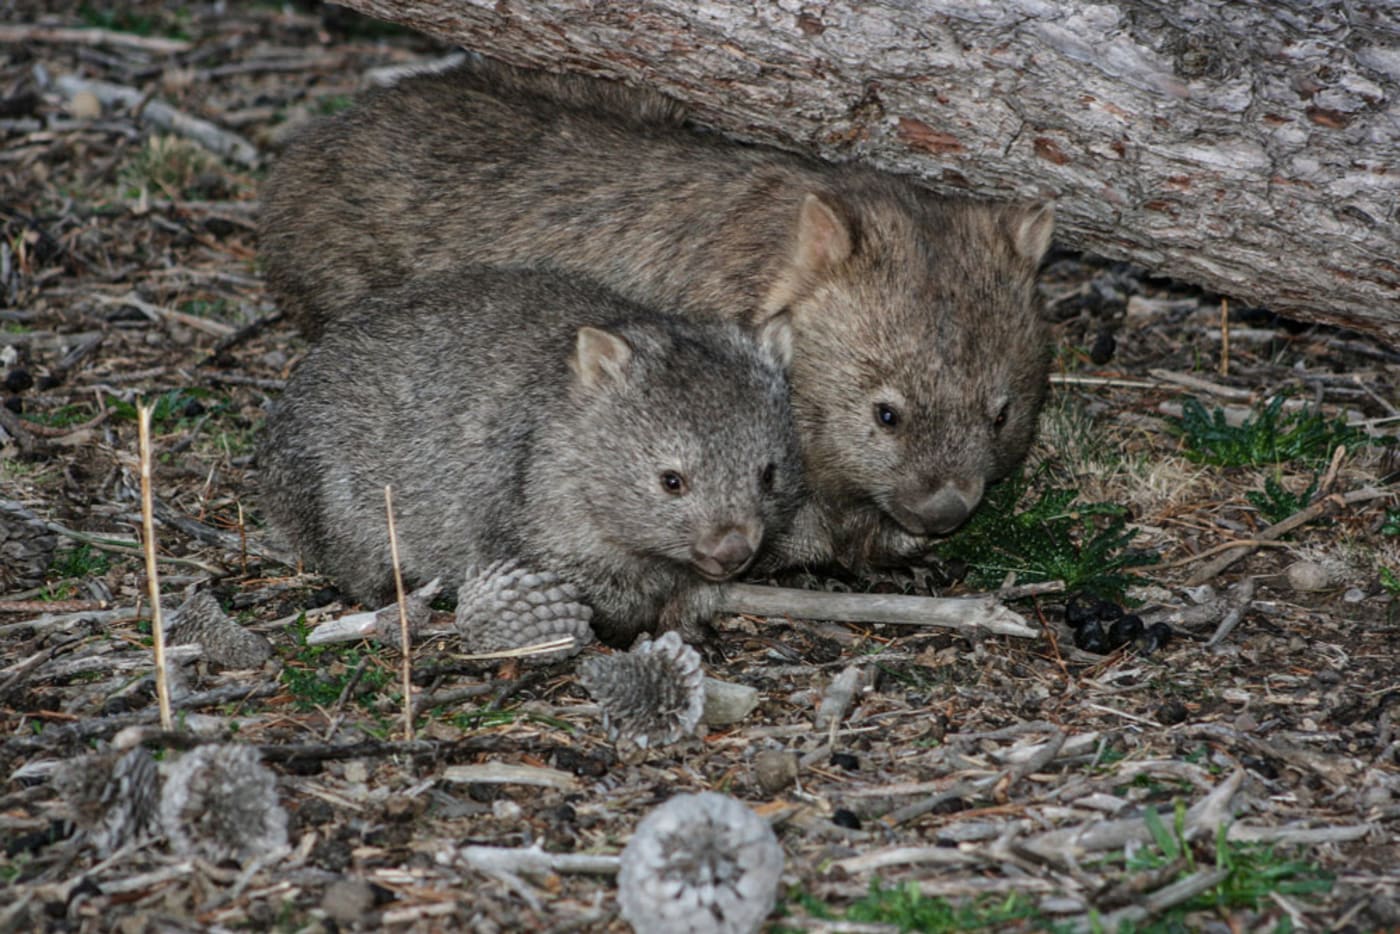 Mother and baby wombat in Tasmania CC BY 2.0 / Steven Penton / Flickr